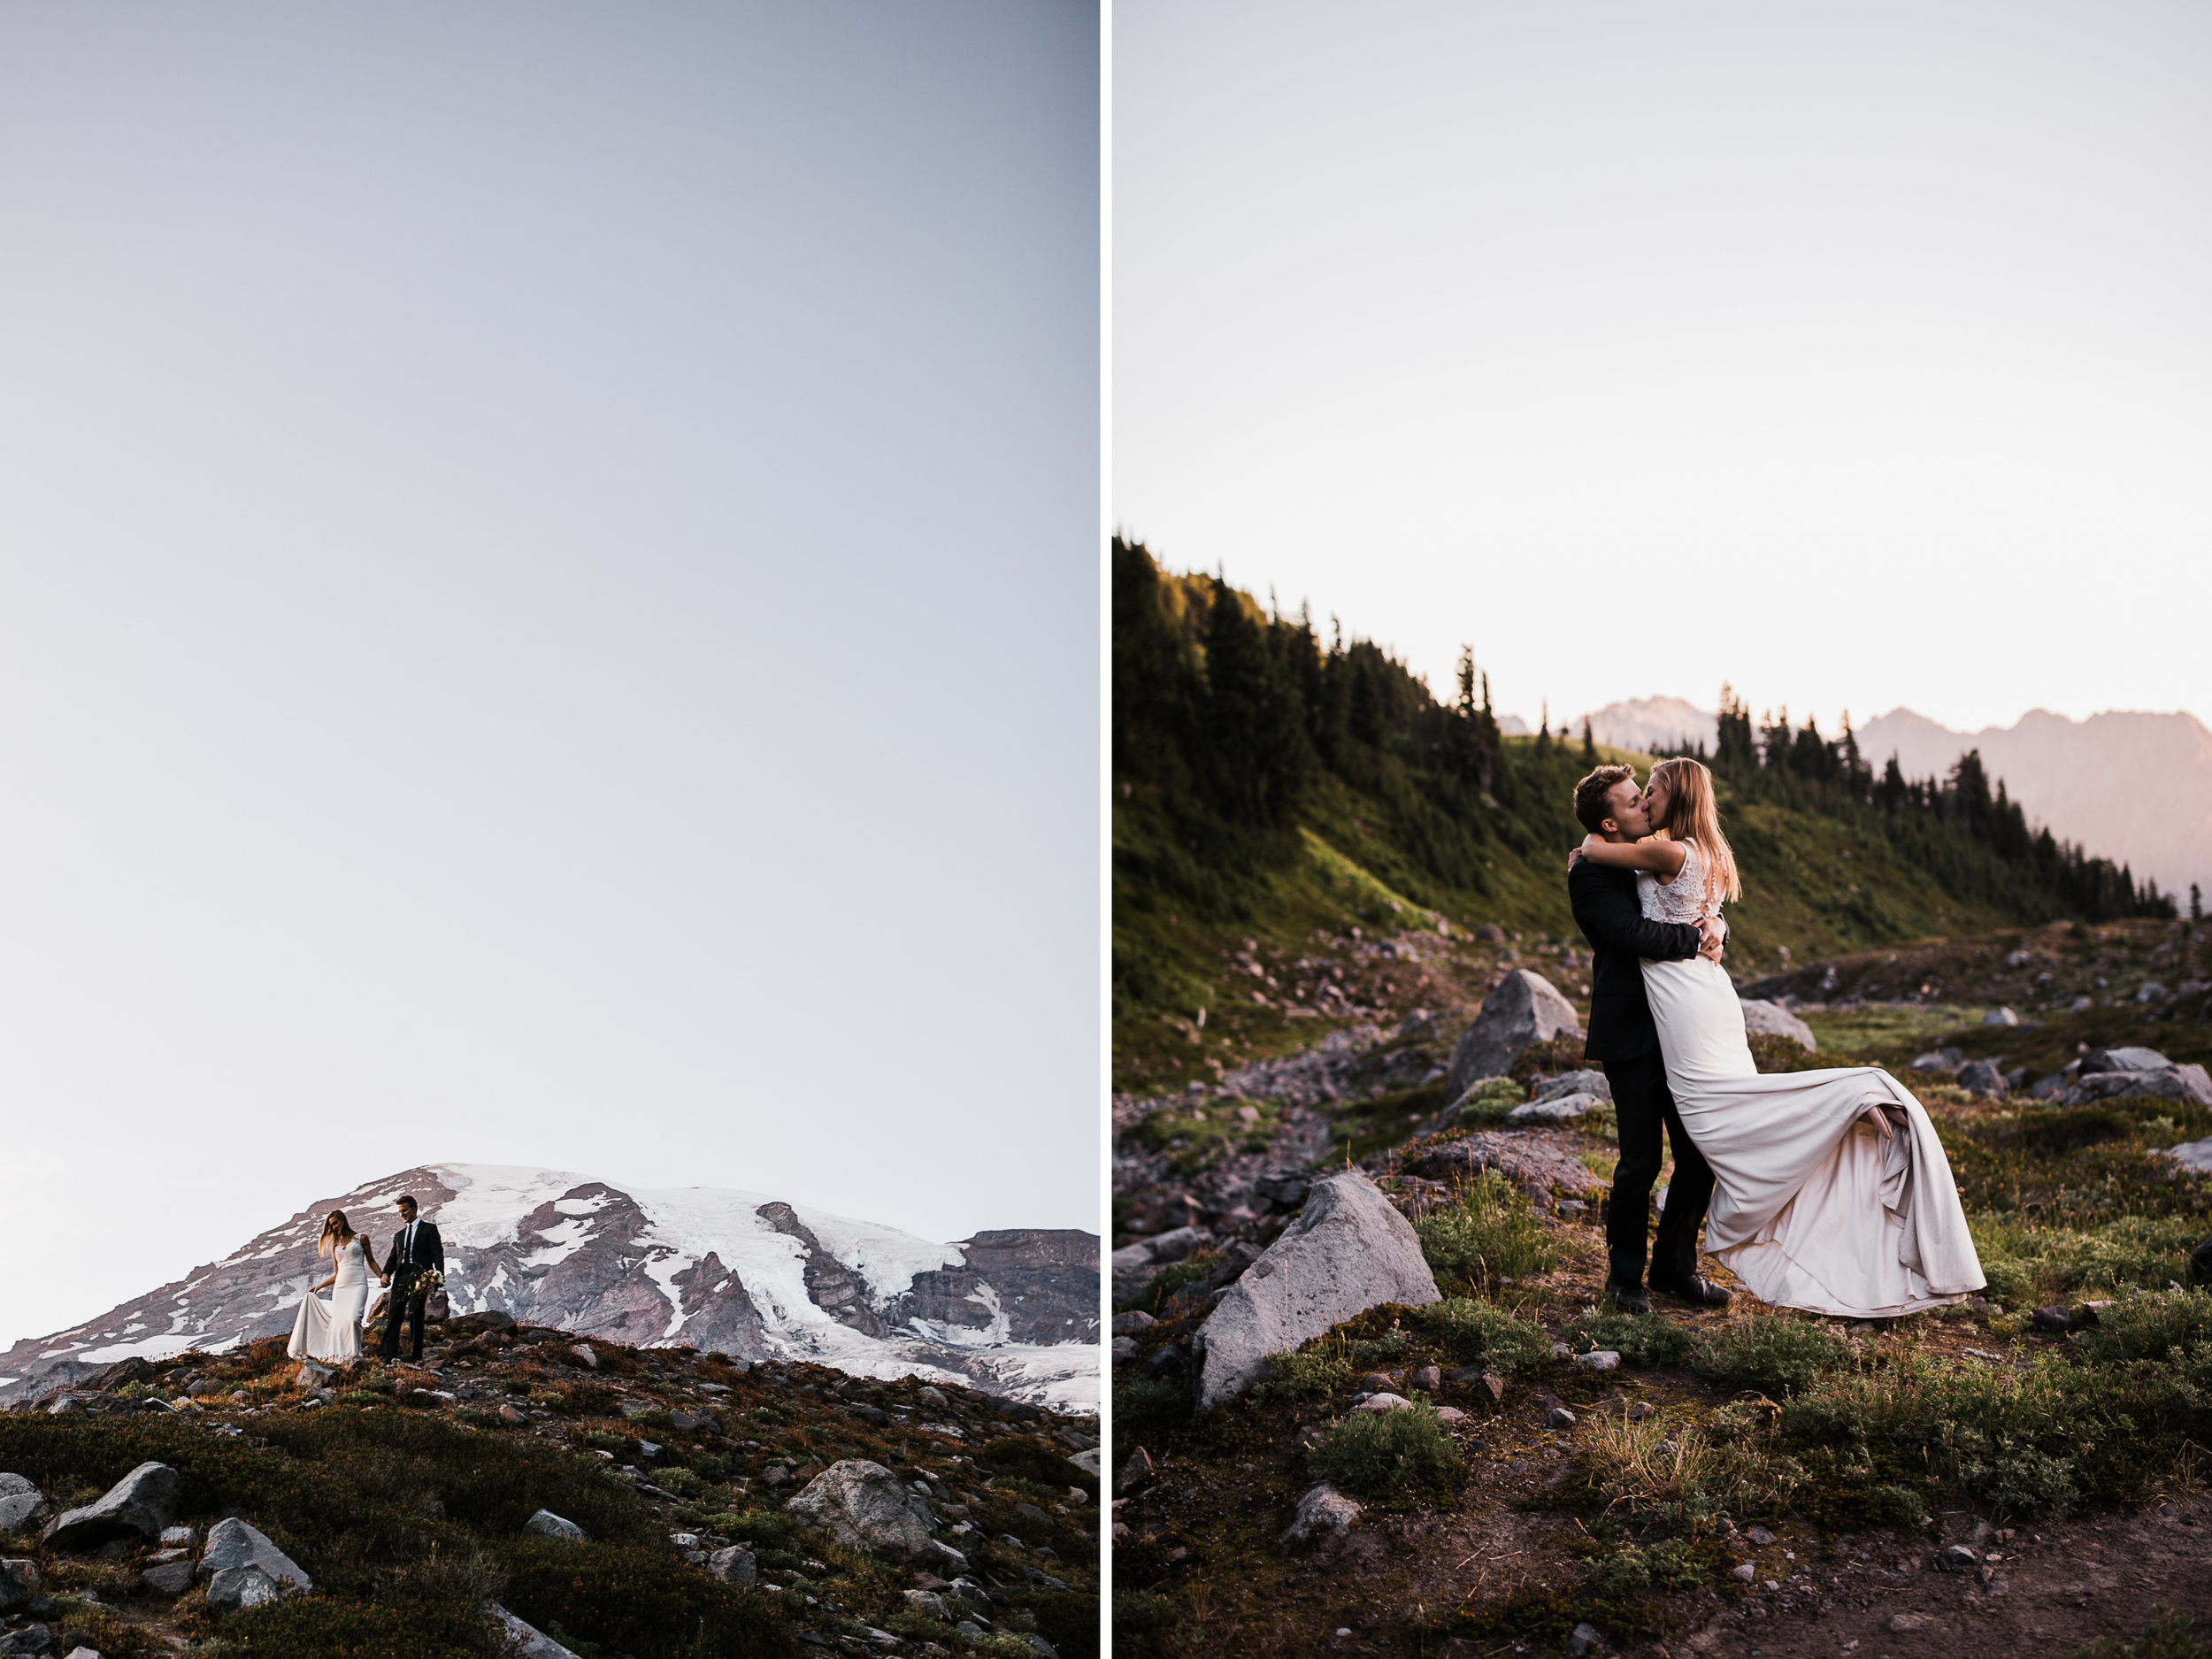 jena + kyler's wedding day-after session in mount rainier national park | washington adventure wedding photographer | the hearnes adventure photography | www.thehearnes.com